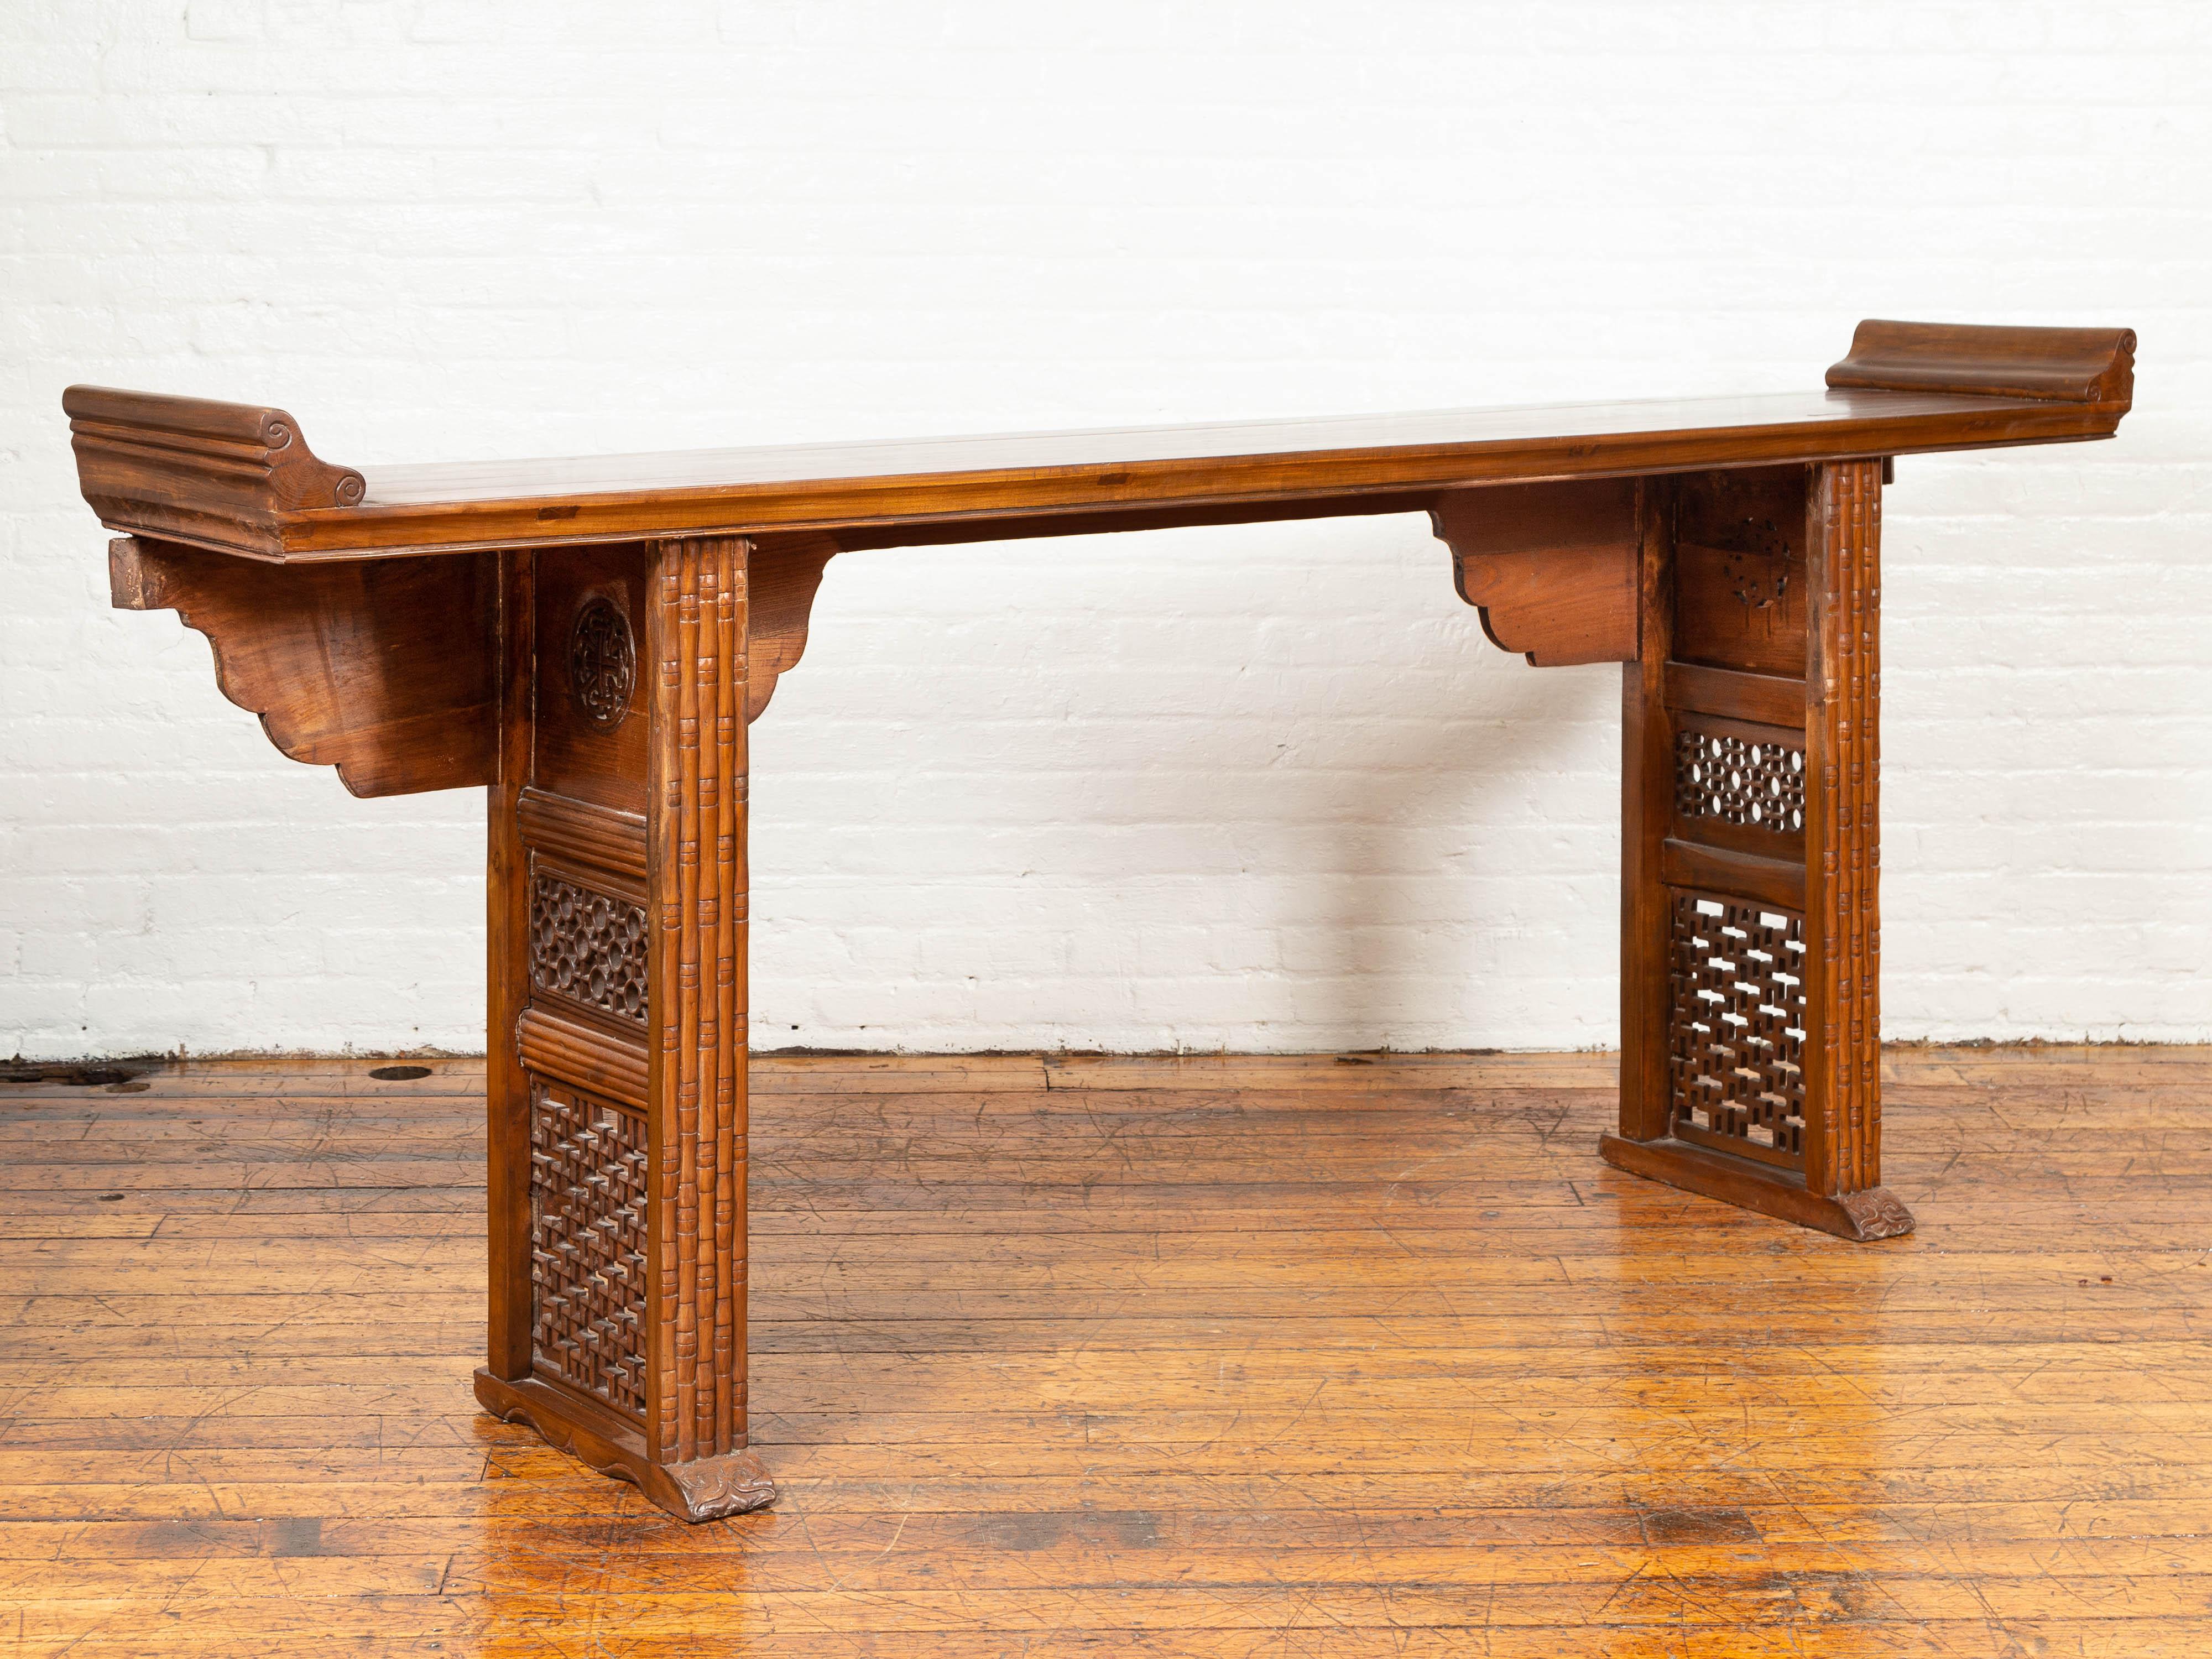 A Chinese Qing dynasty period altar console table from the early 20th century, with everted flanges, hand carved bamboo style design and fretwork motifs. Born in China during the Qing dynasty, this altar console table features a rectangular top,